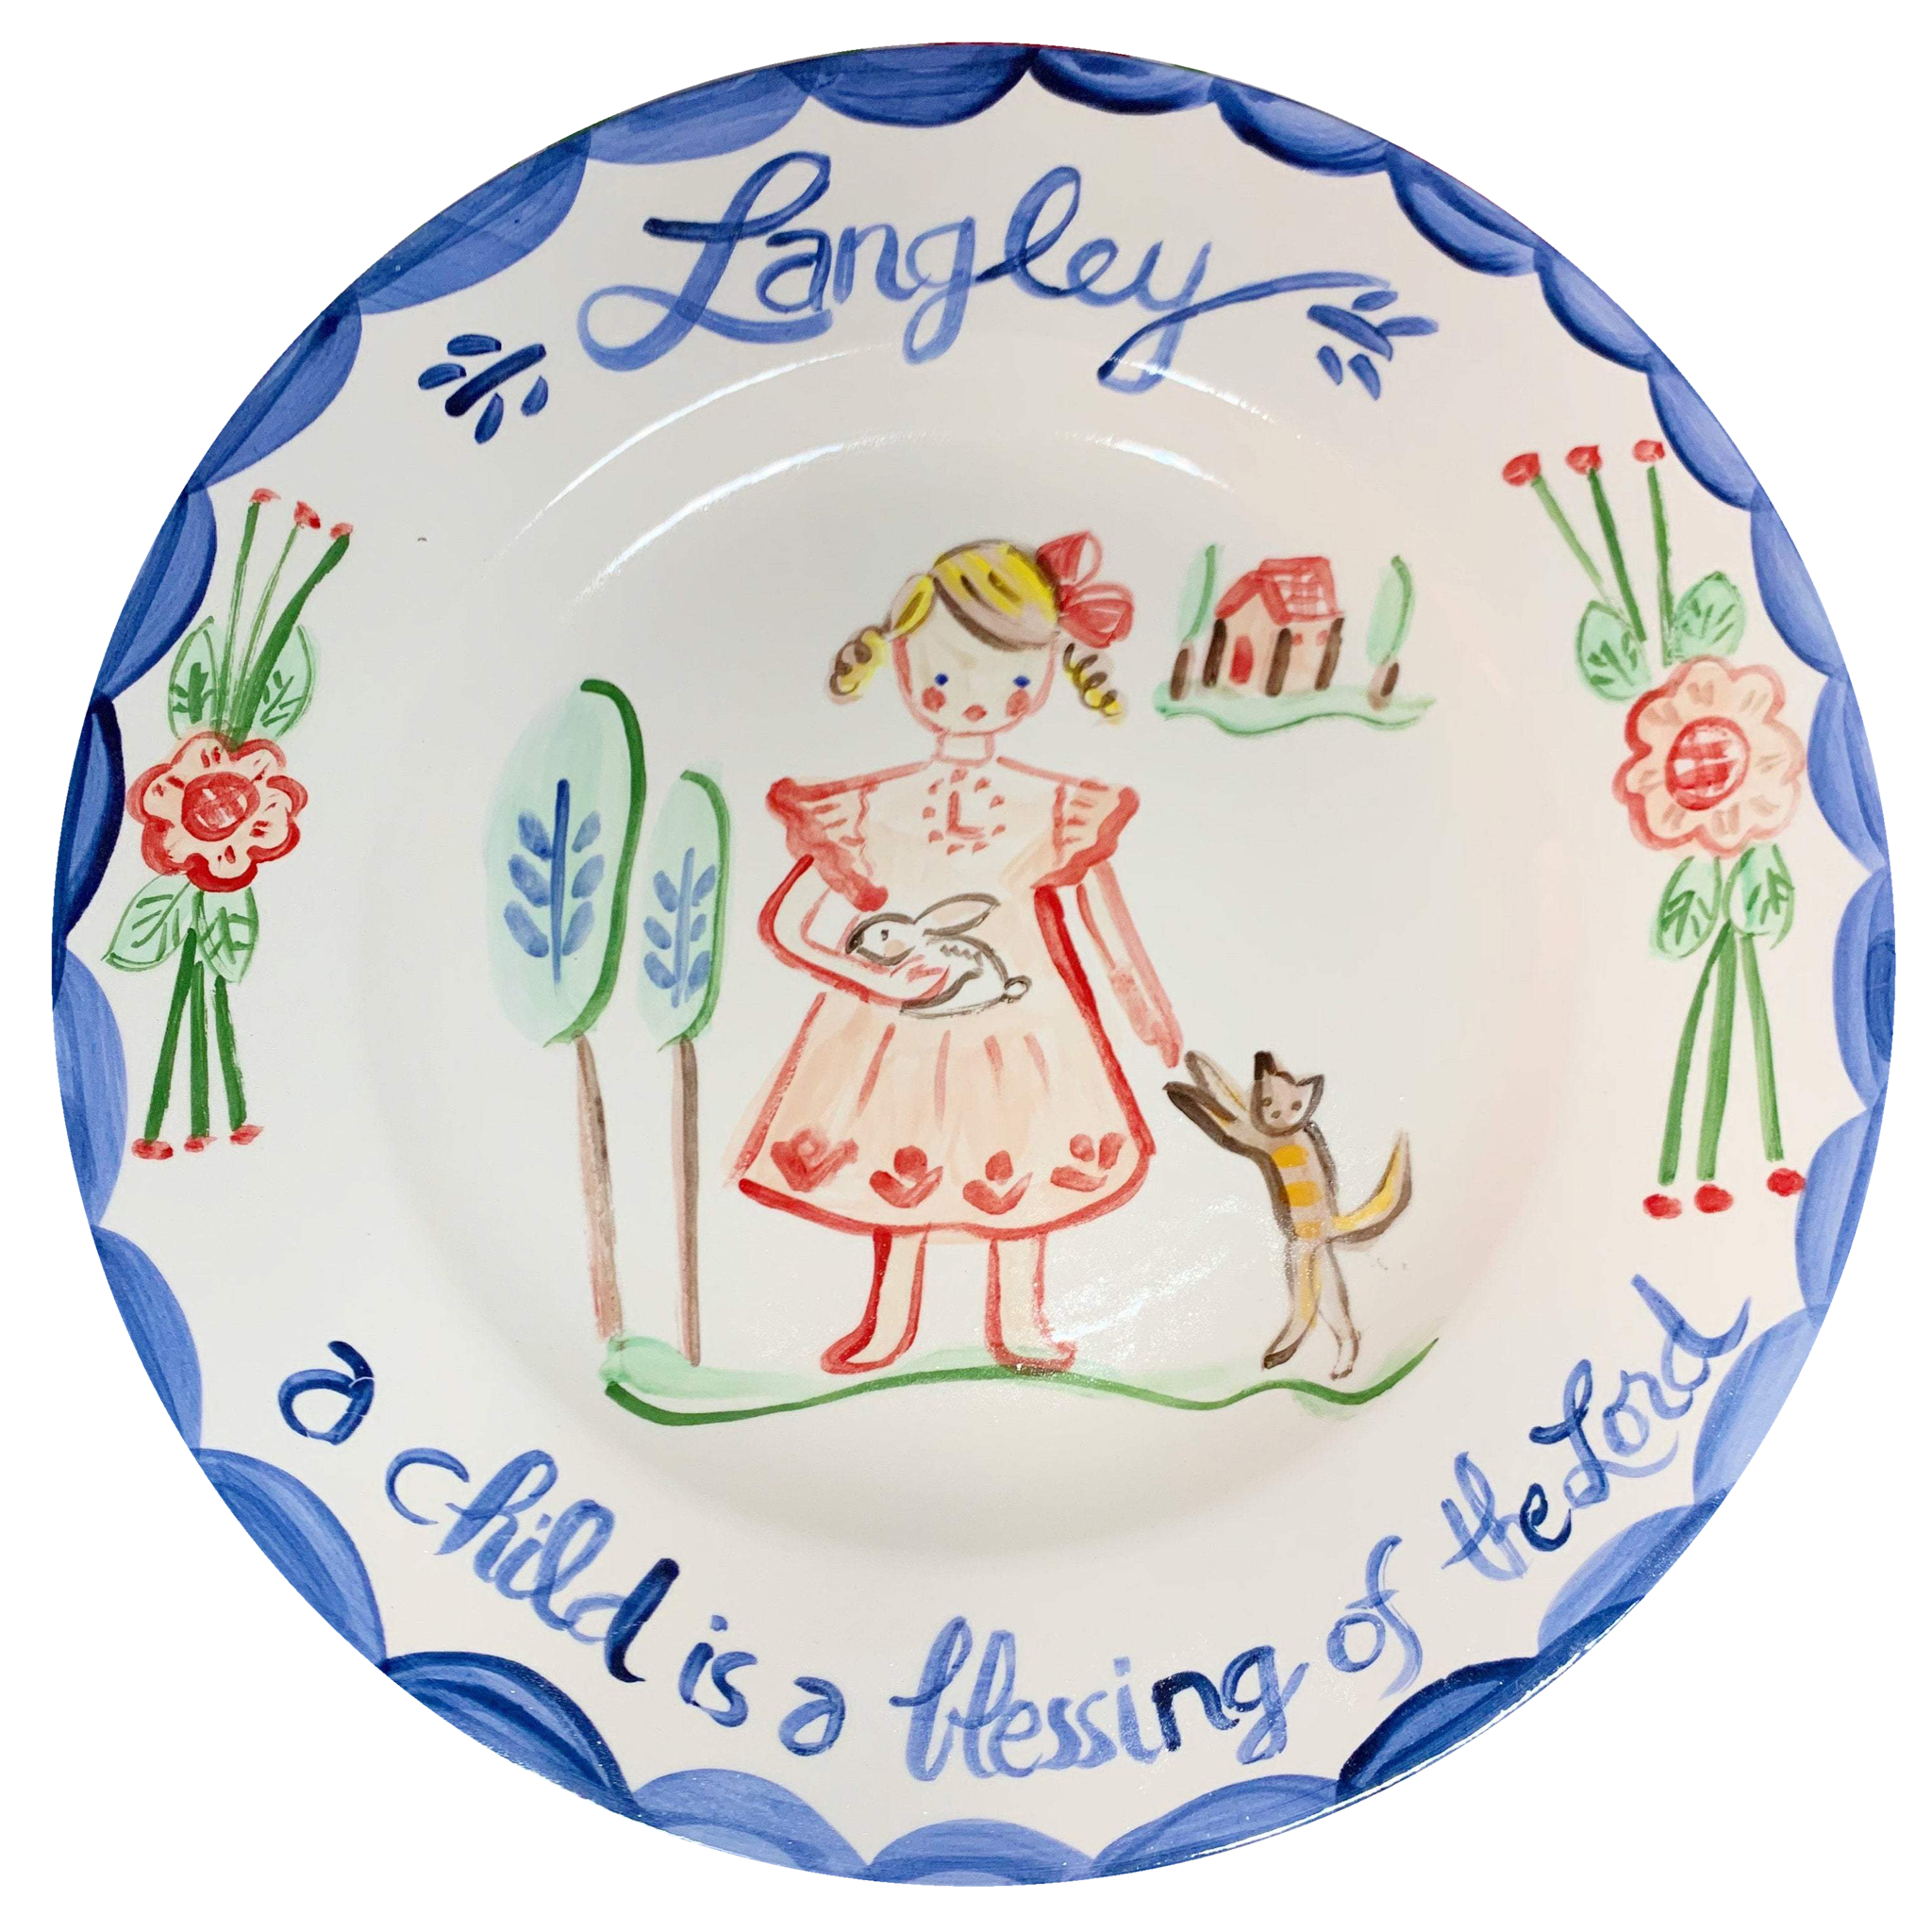 Psalm 127:3 Plate - A Child is a Blessing - Tricia Lowenfield Design